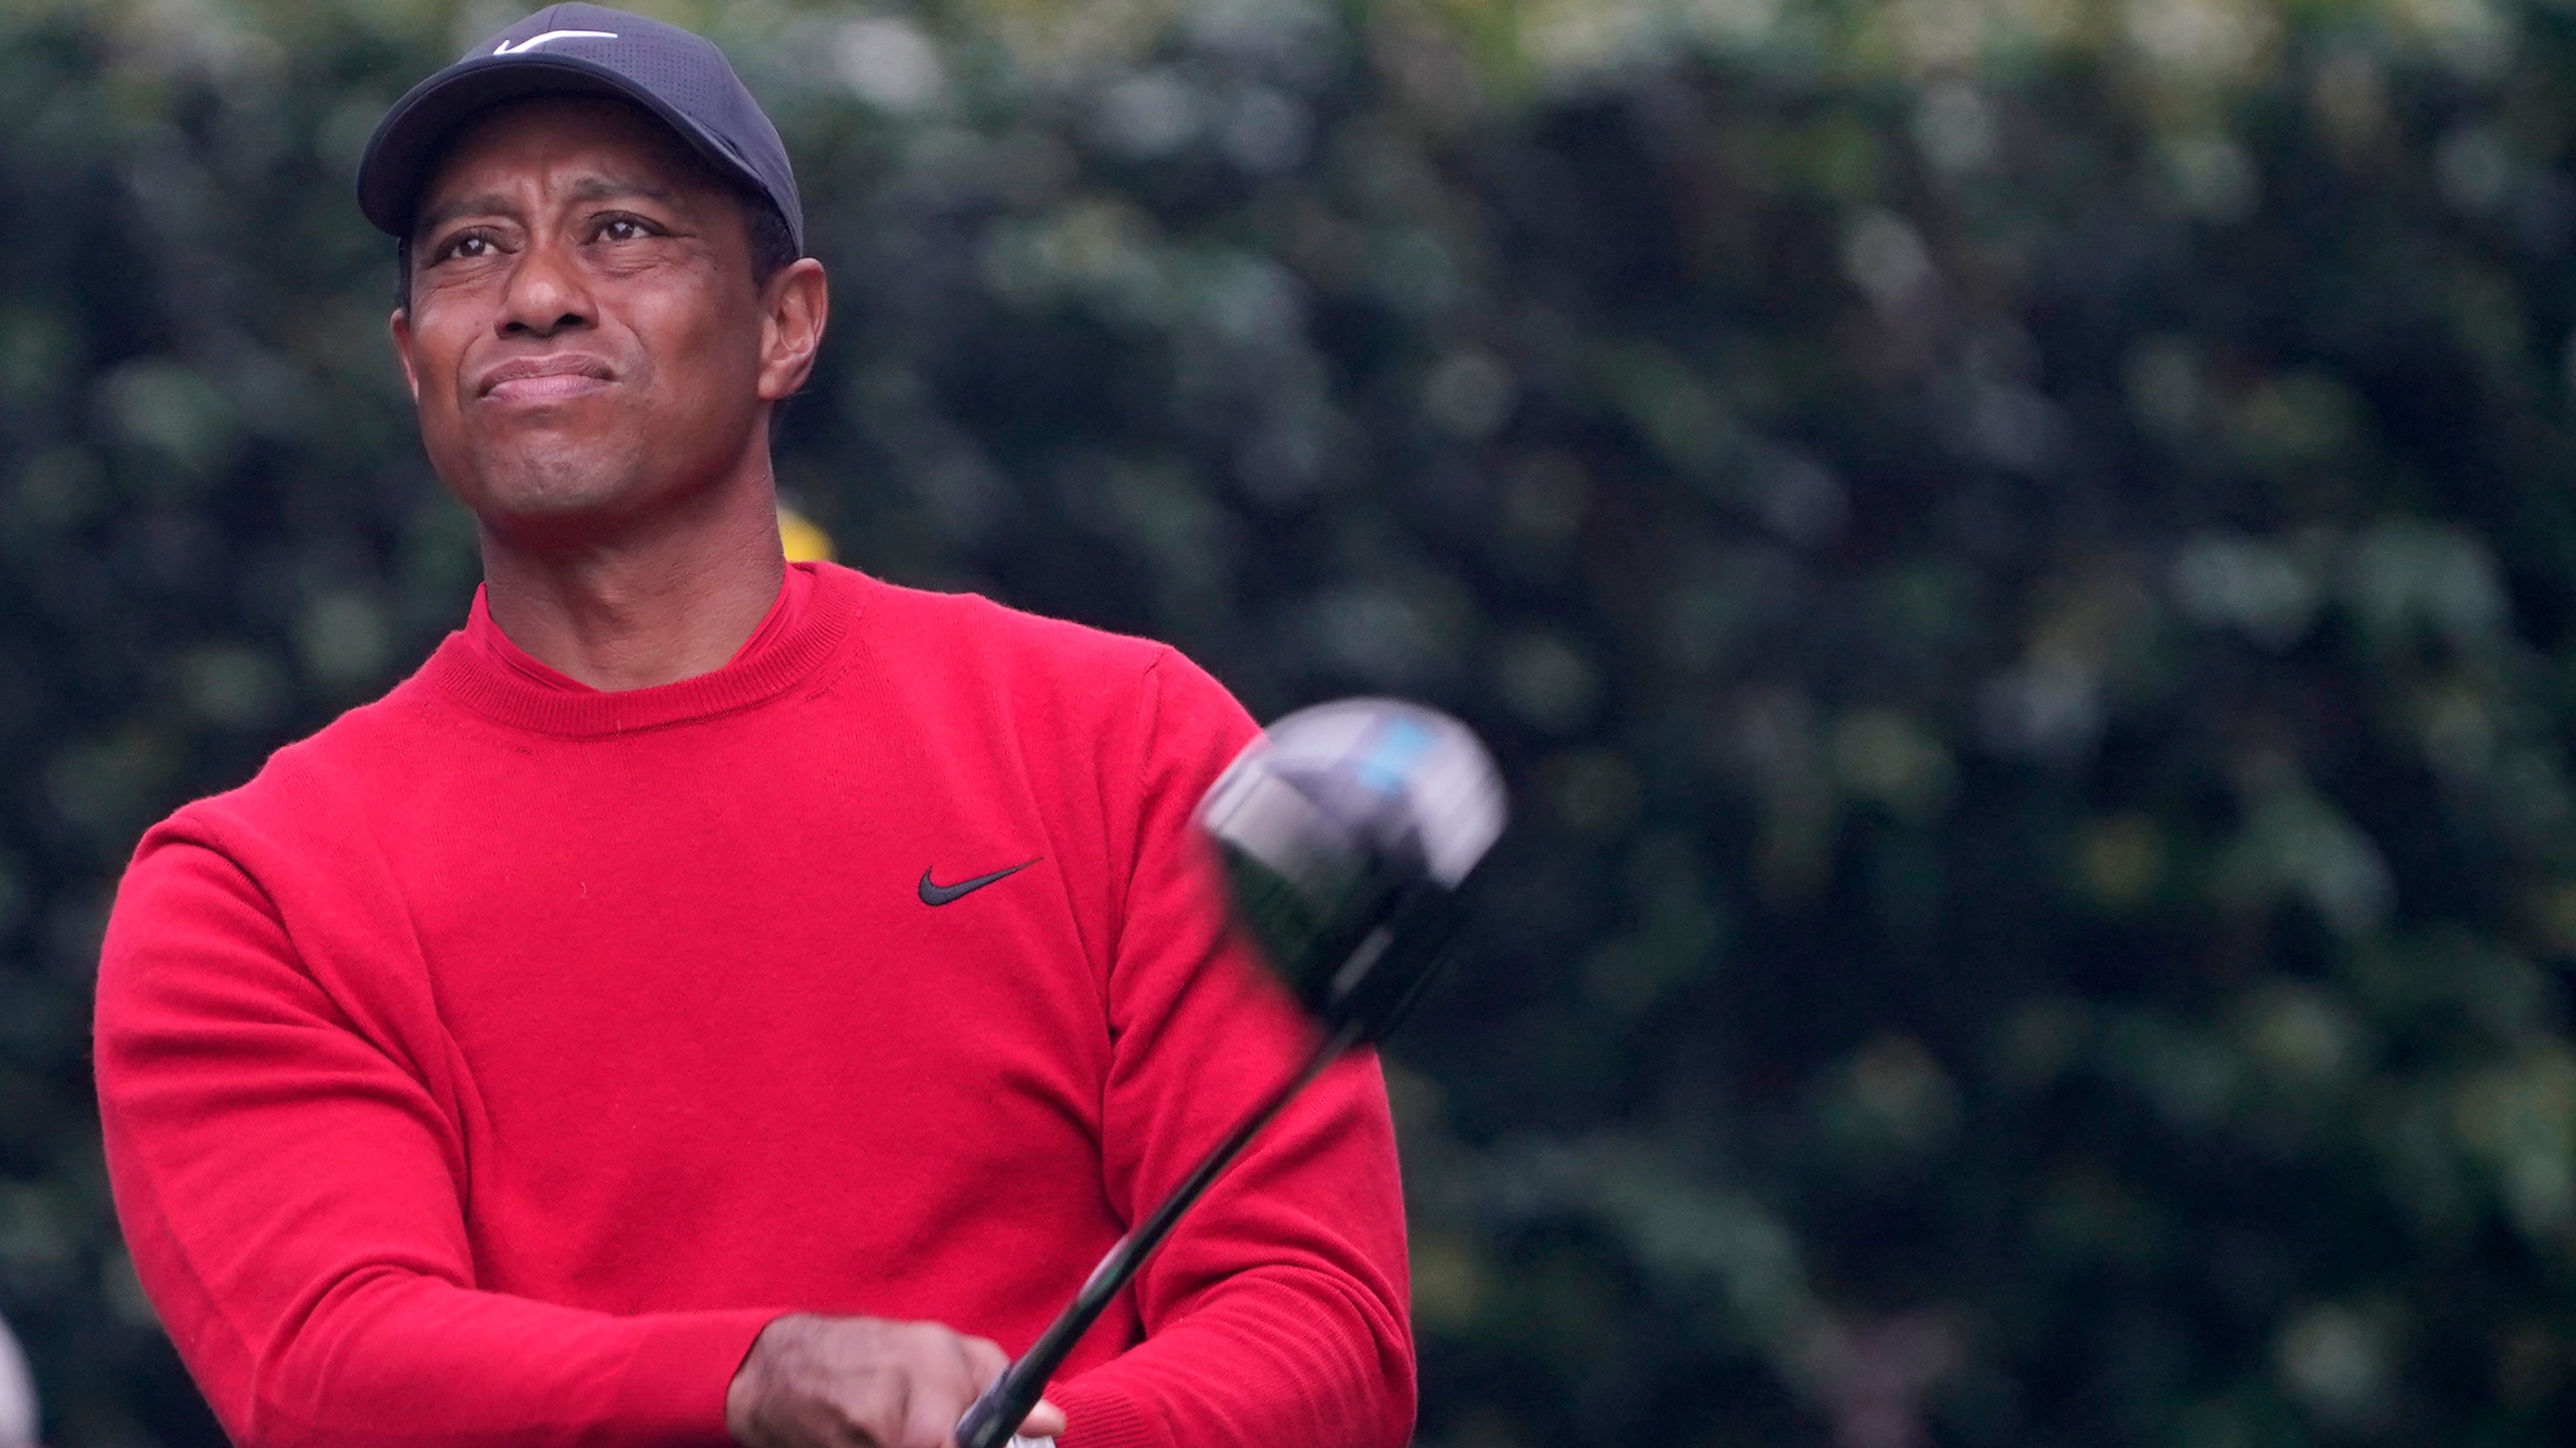 Car accident Tiger Woods: Woods was transferred to Cedars-Sinai Medical Center